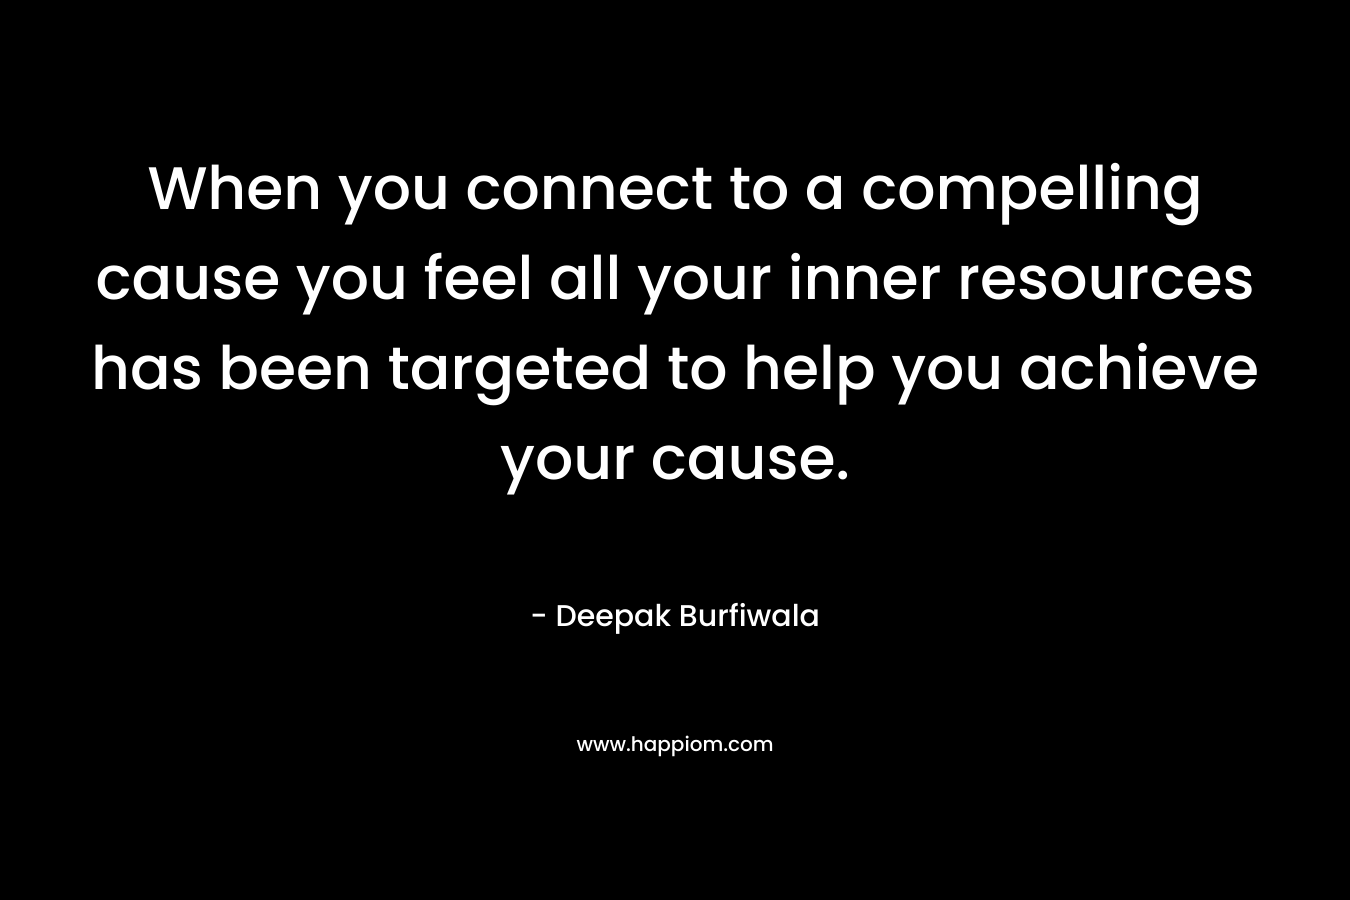 When you connect to a compelling cause you feel all your inner resources has been targeted to help you achieve your cause. – Deepak Burfiwala